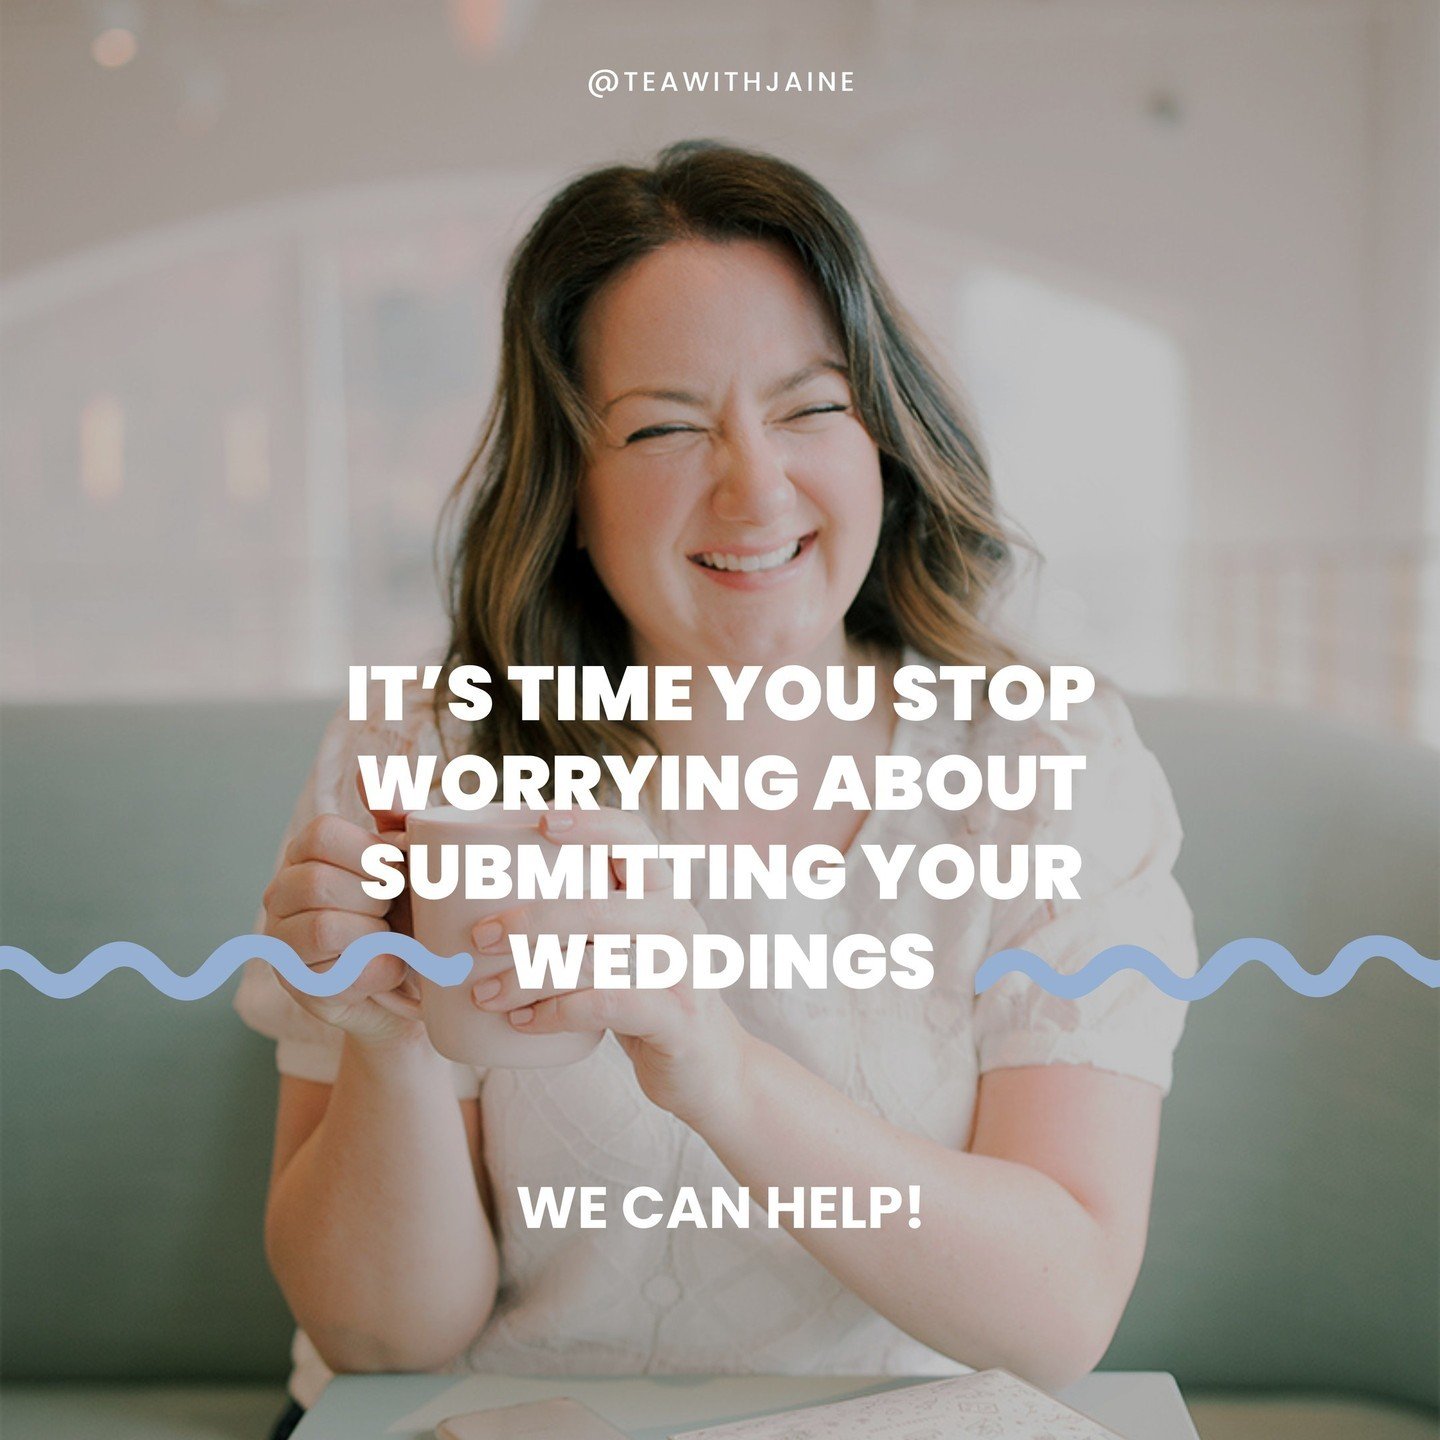 We can help you get featured 😱⁠
⁠
Over the last 4 years, I've helped so many talented wedding photographers and wedding planners get featured in their top publications.⁠
⁠
We take the overwhelm out of submissions so you don't have to worry!⁠
⁠
And r